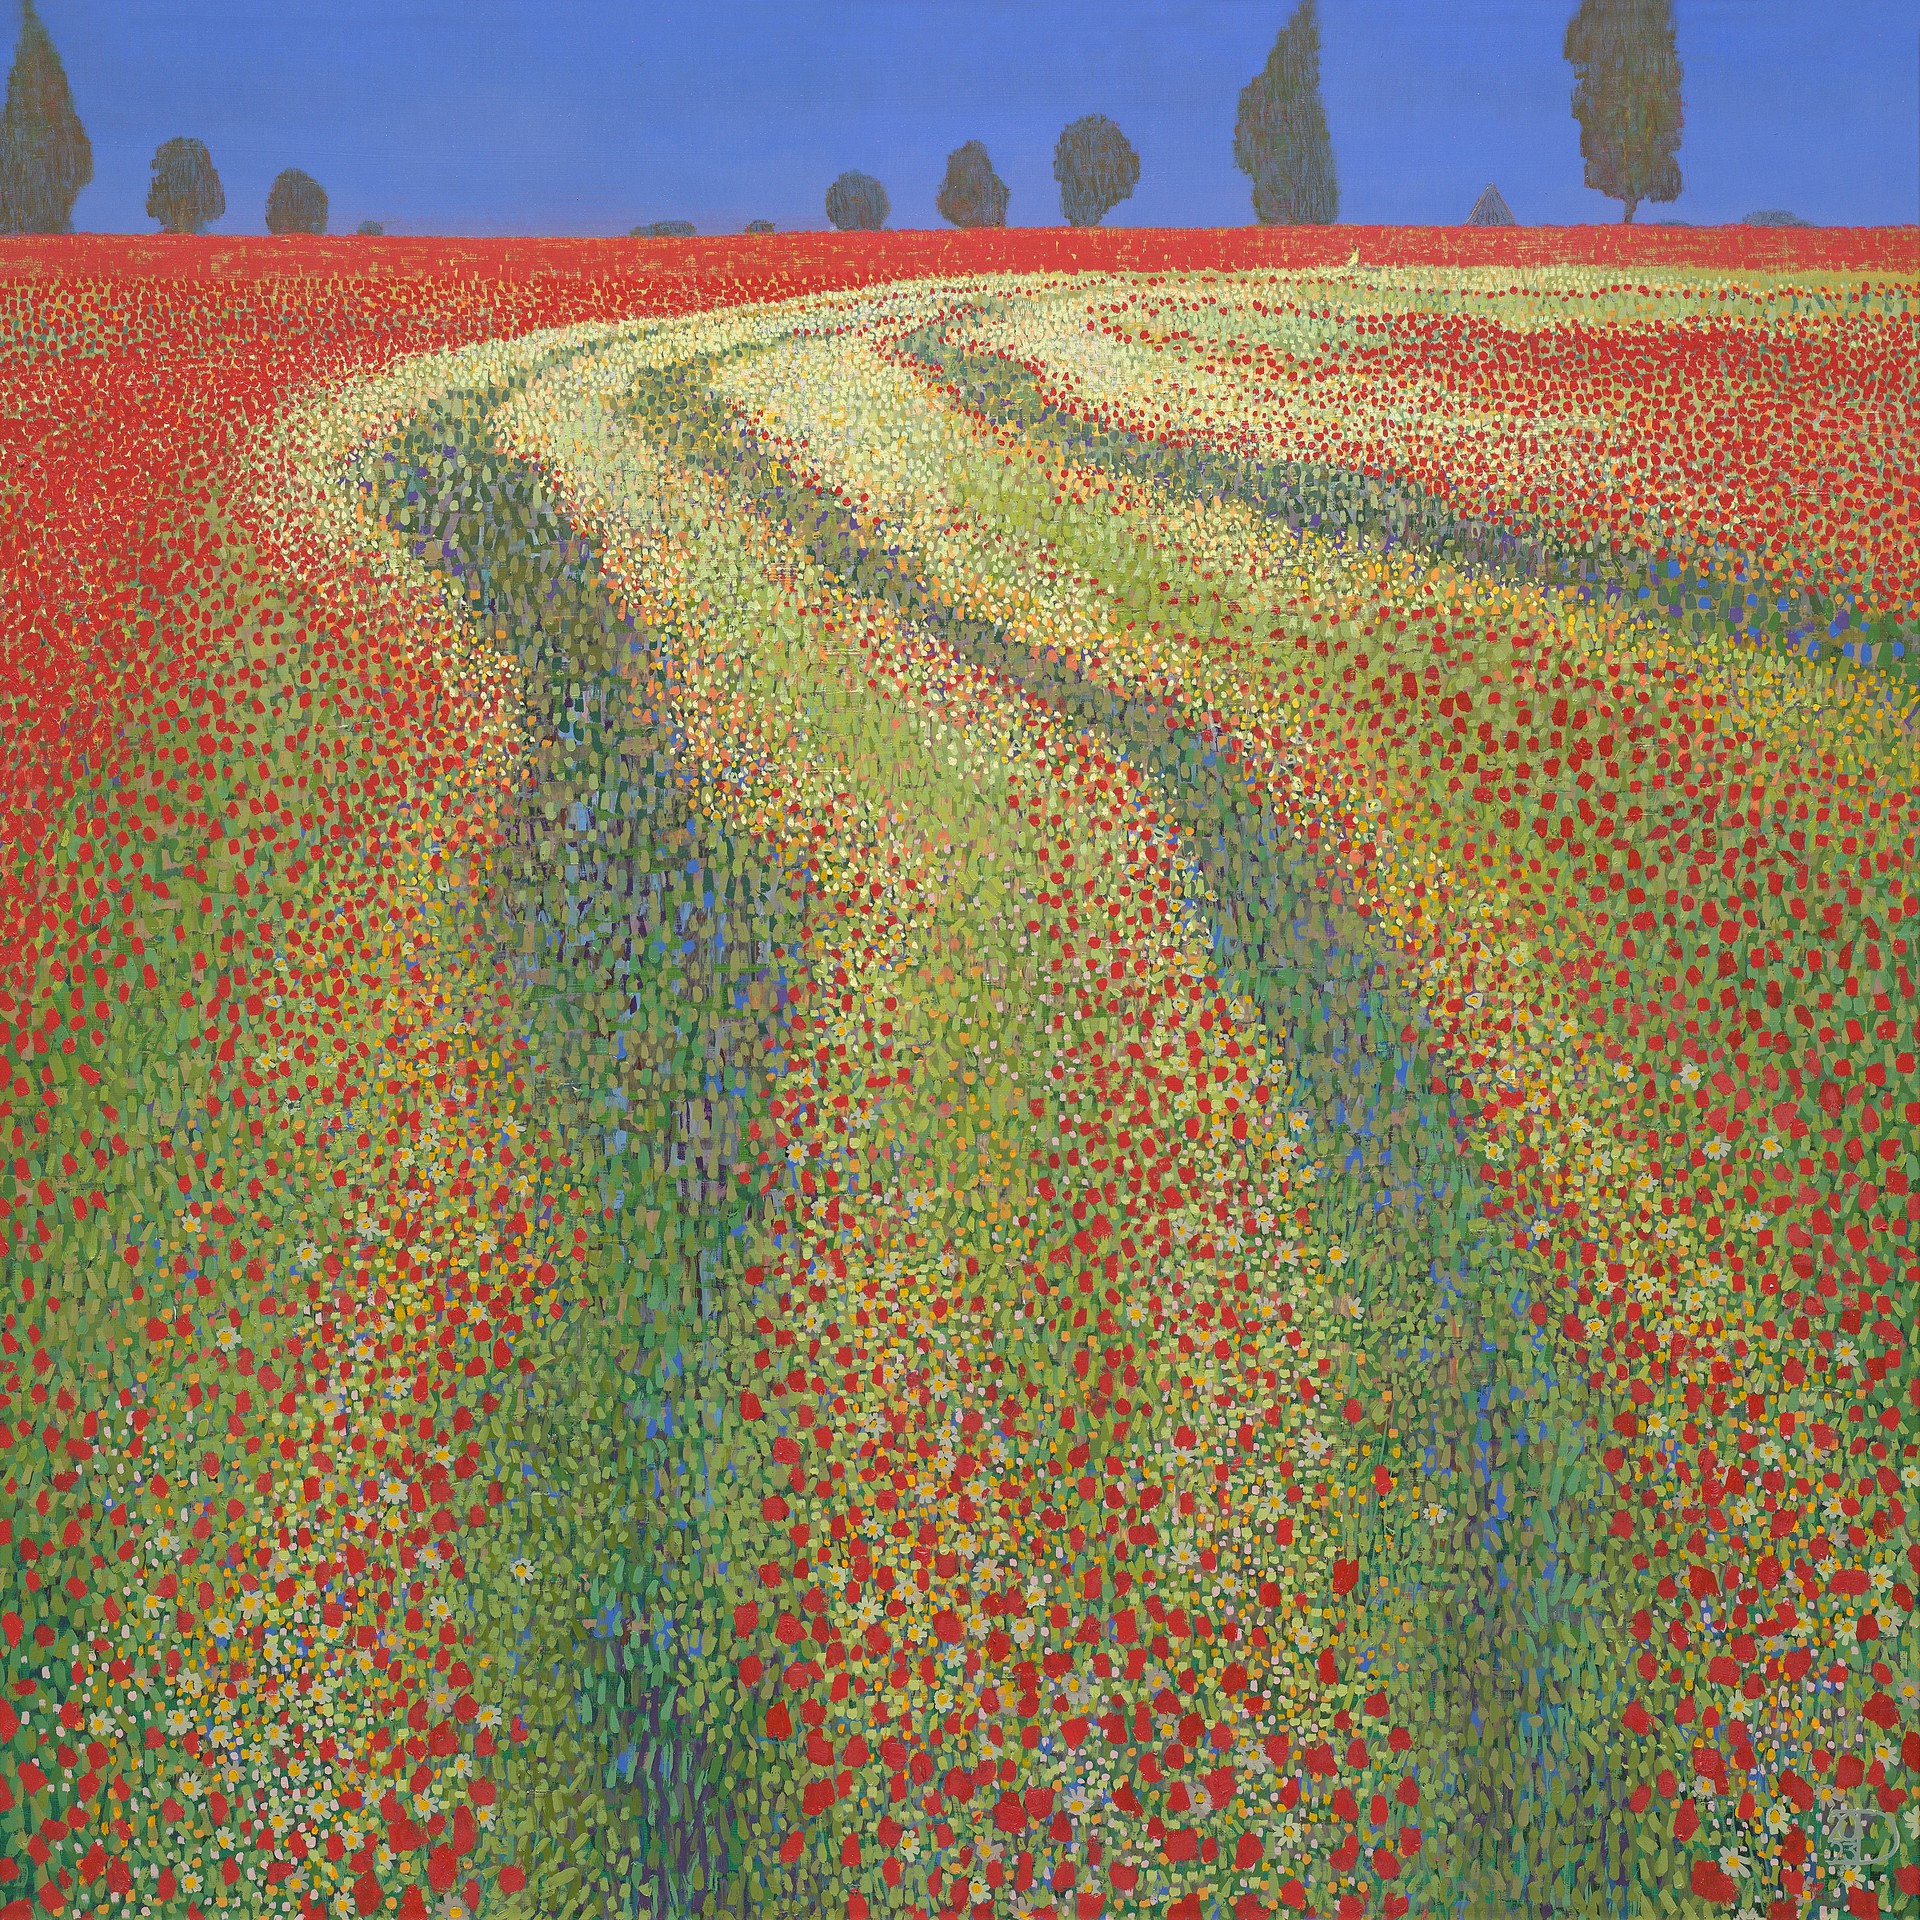 Over the Hill by Ton Dubbeldam